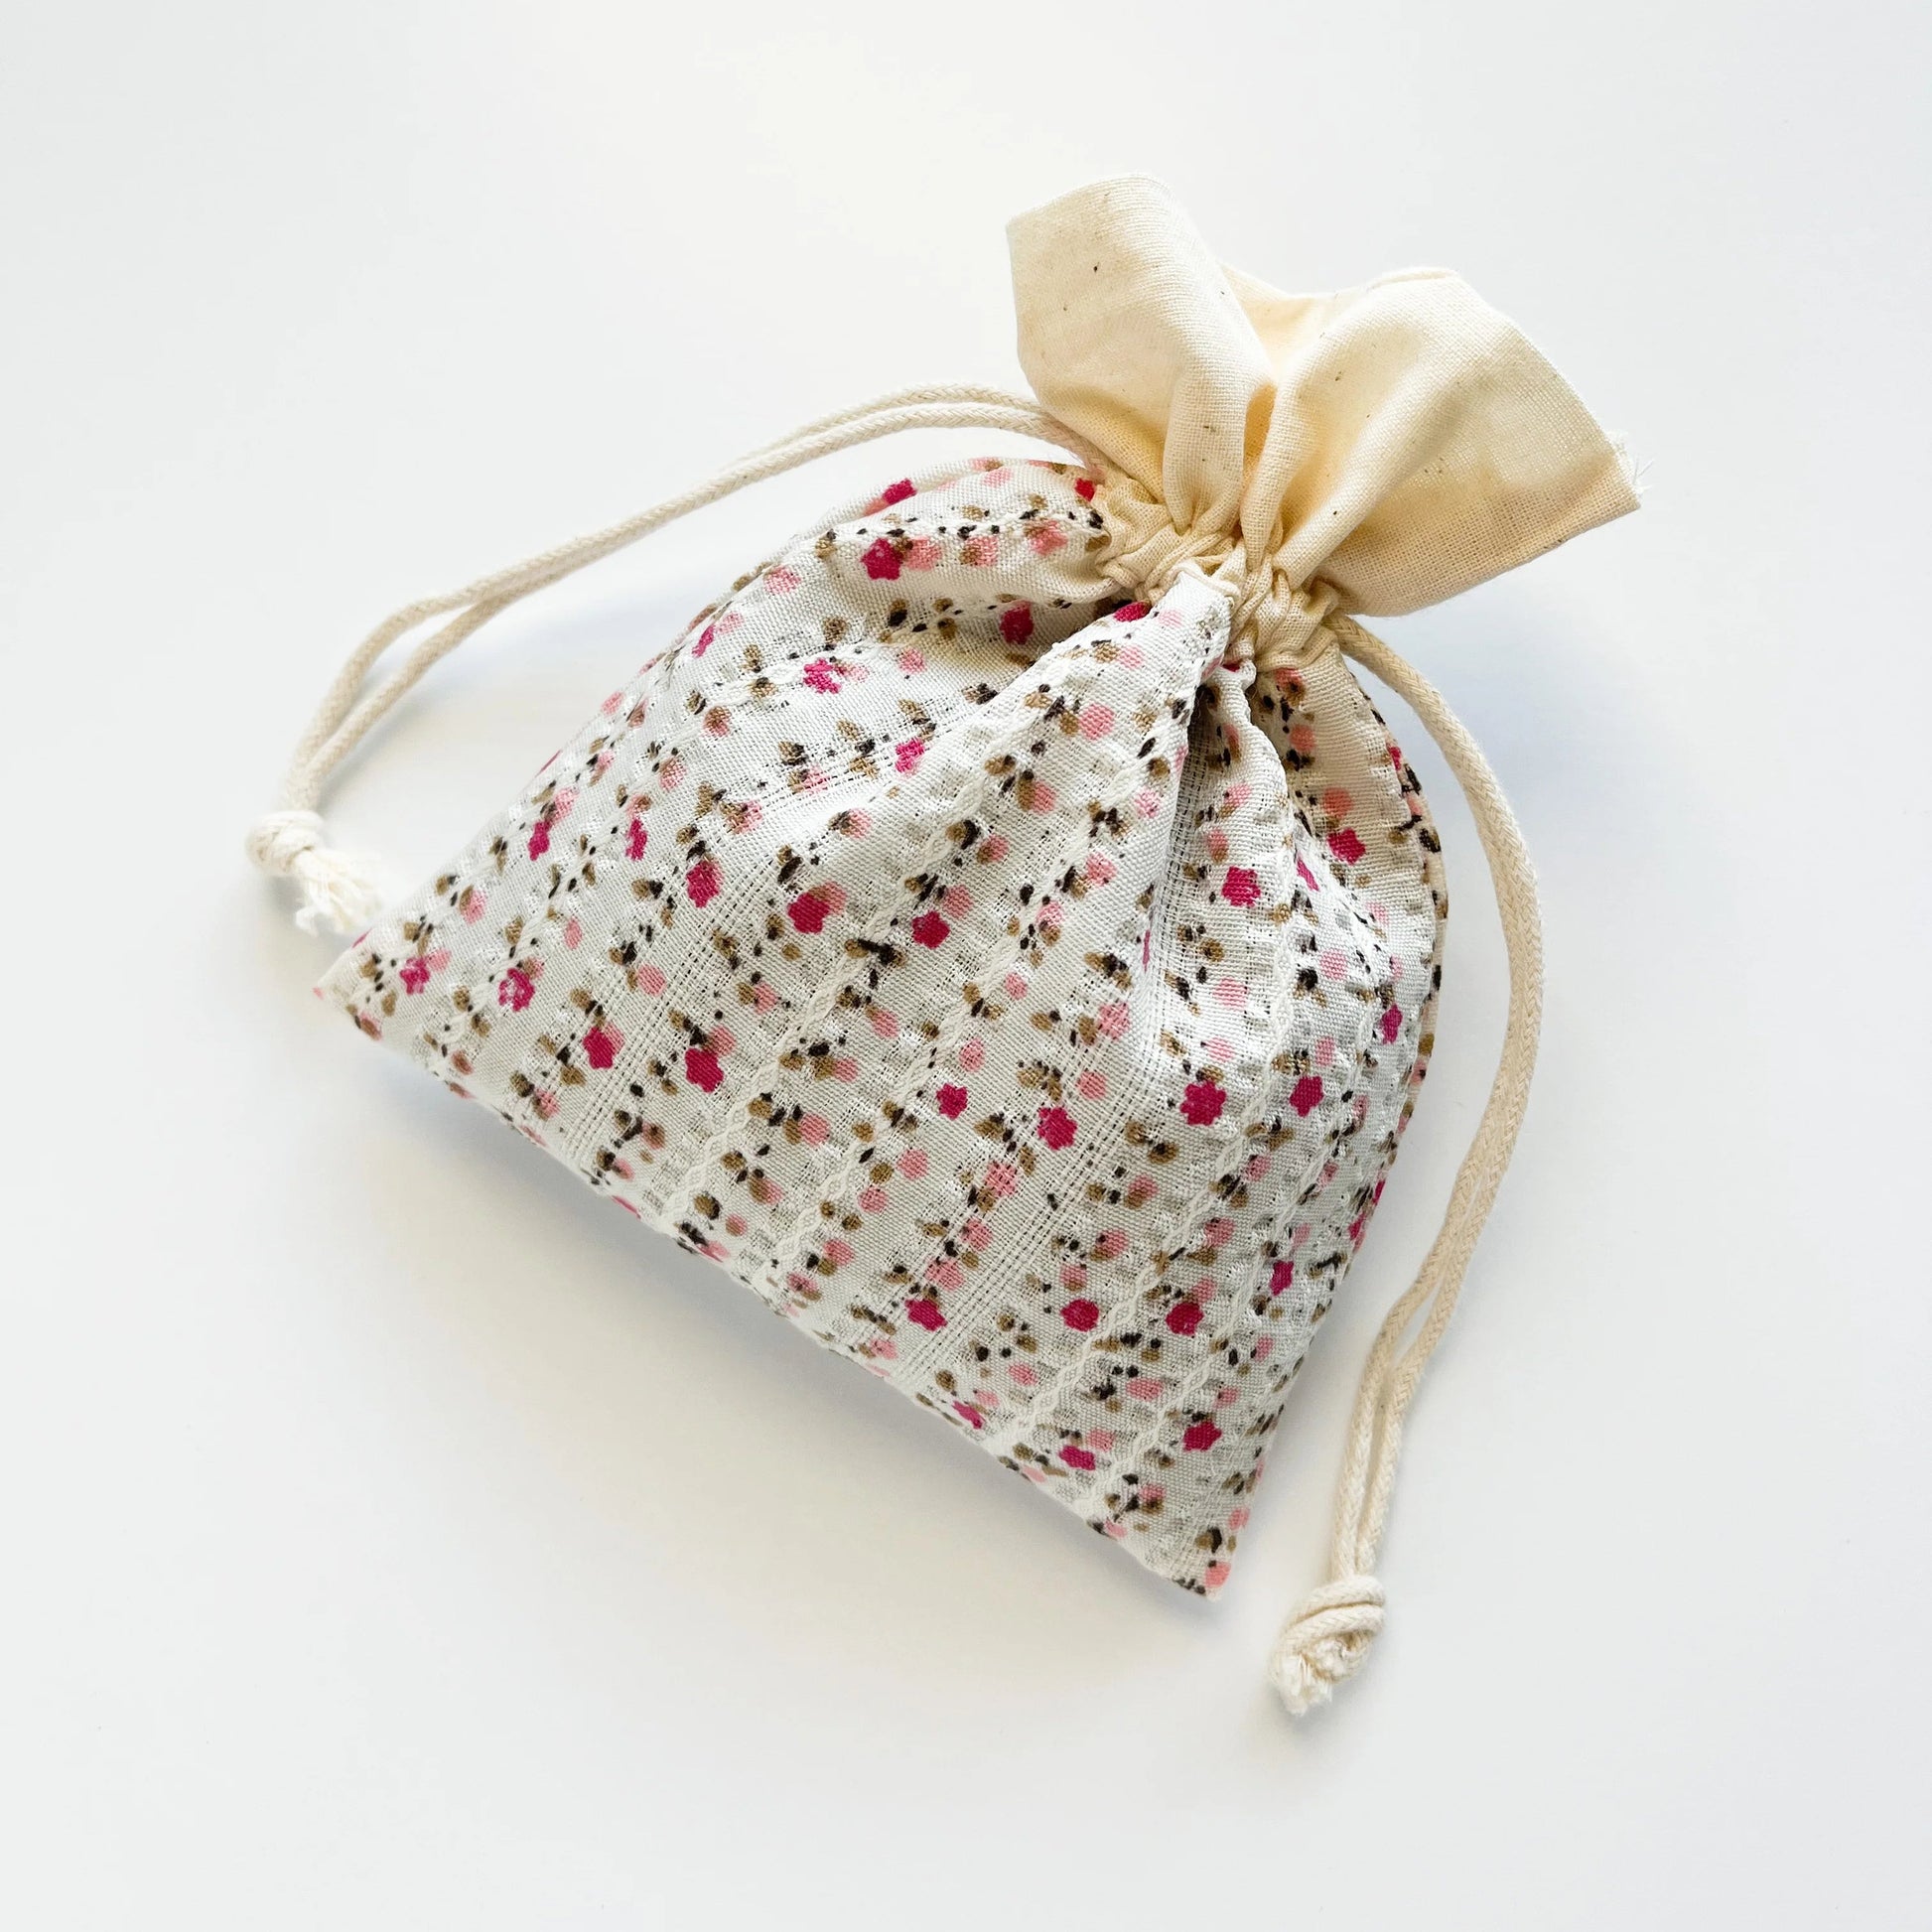 lavender sachet bag with floral fabric and drawstring 